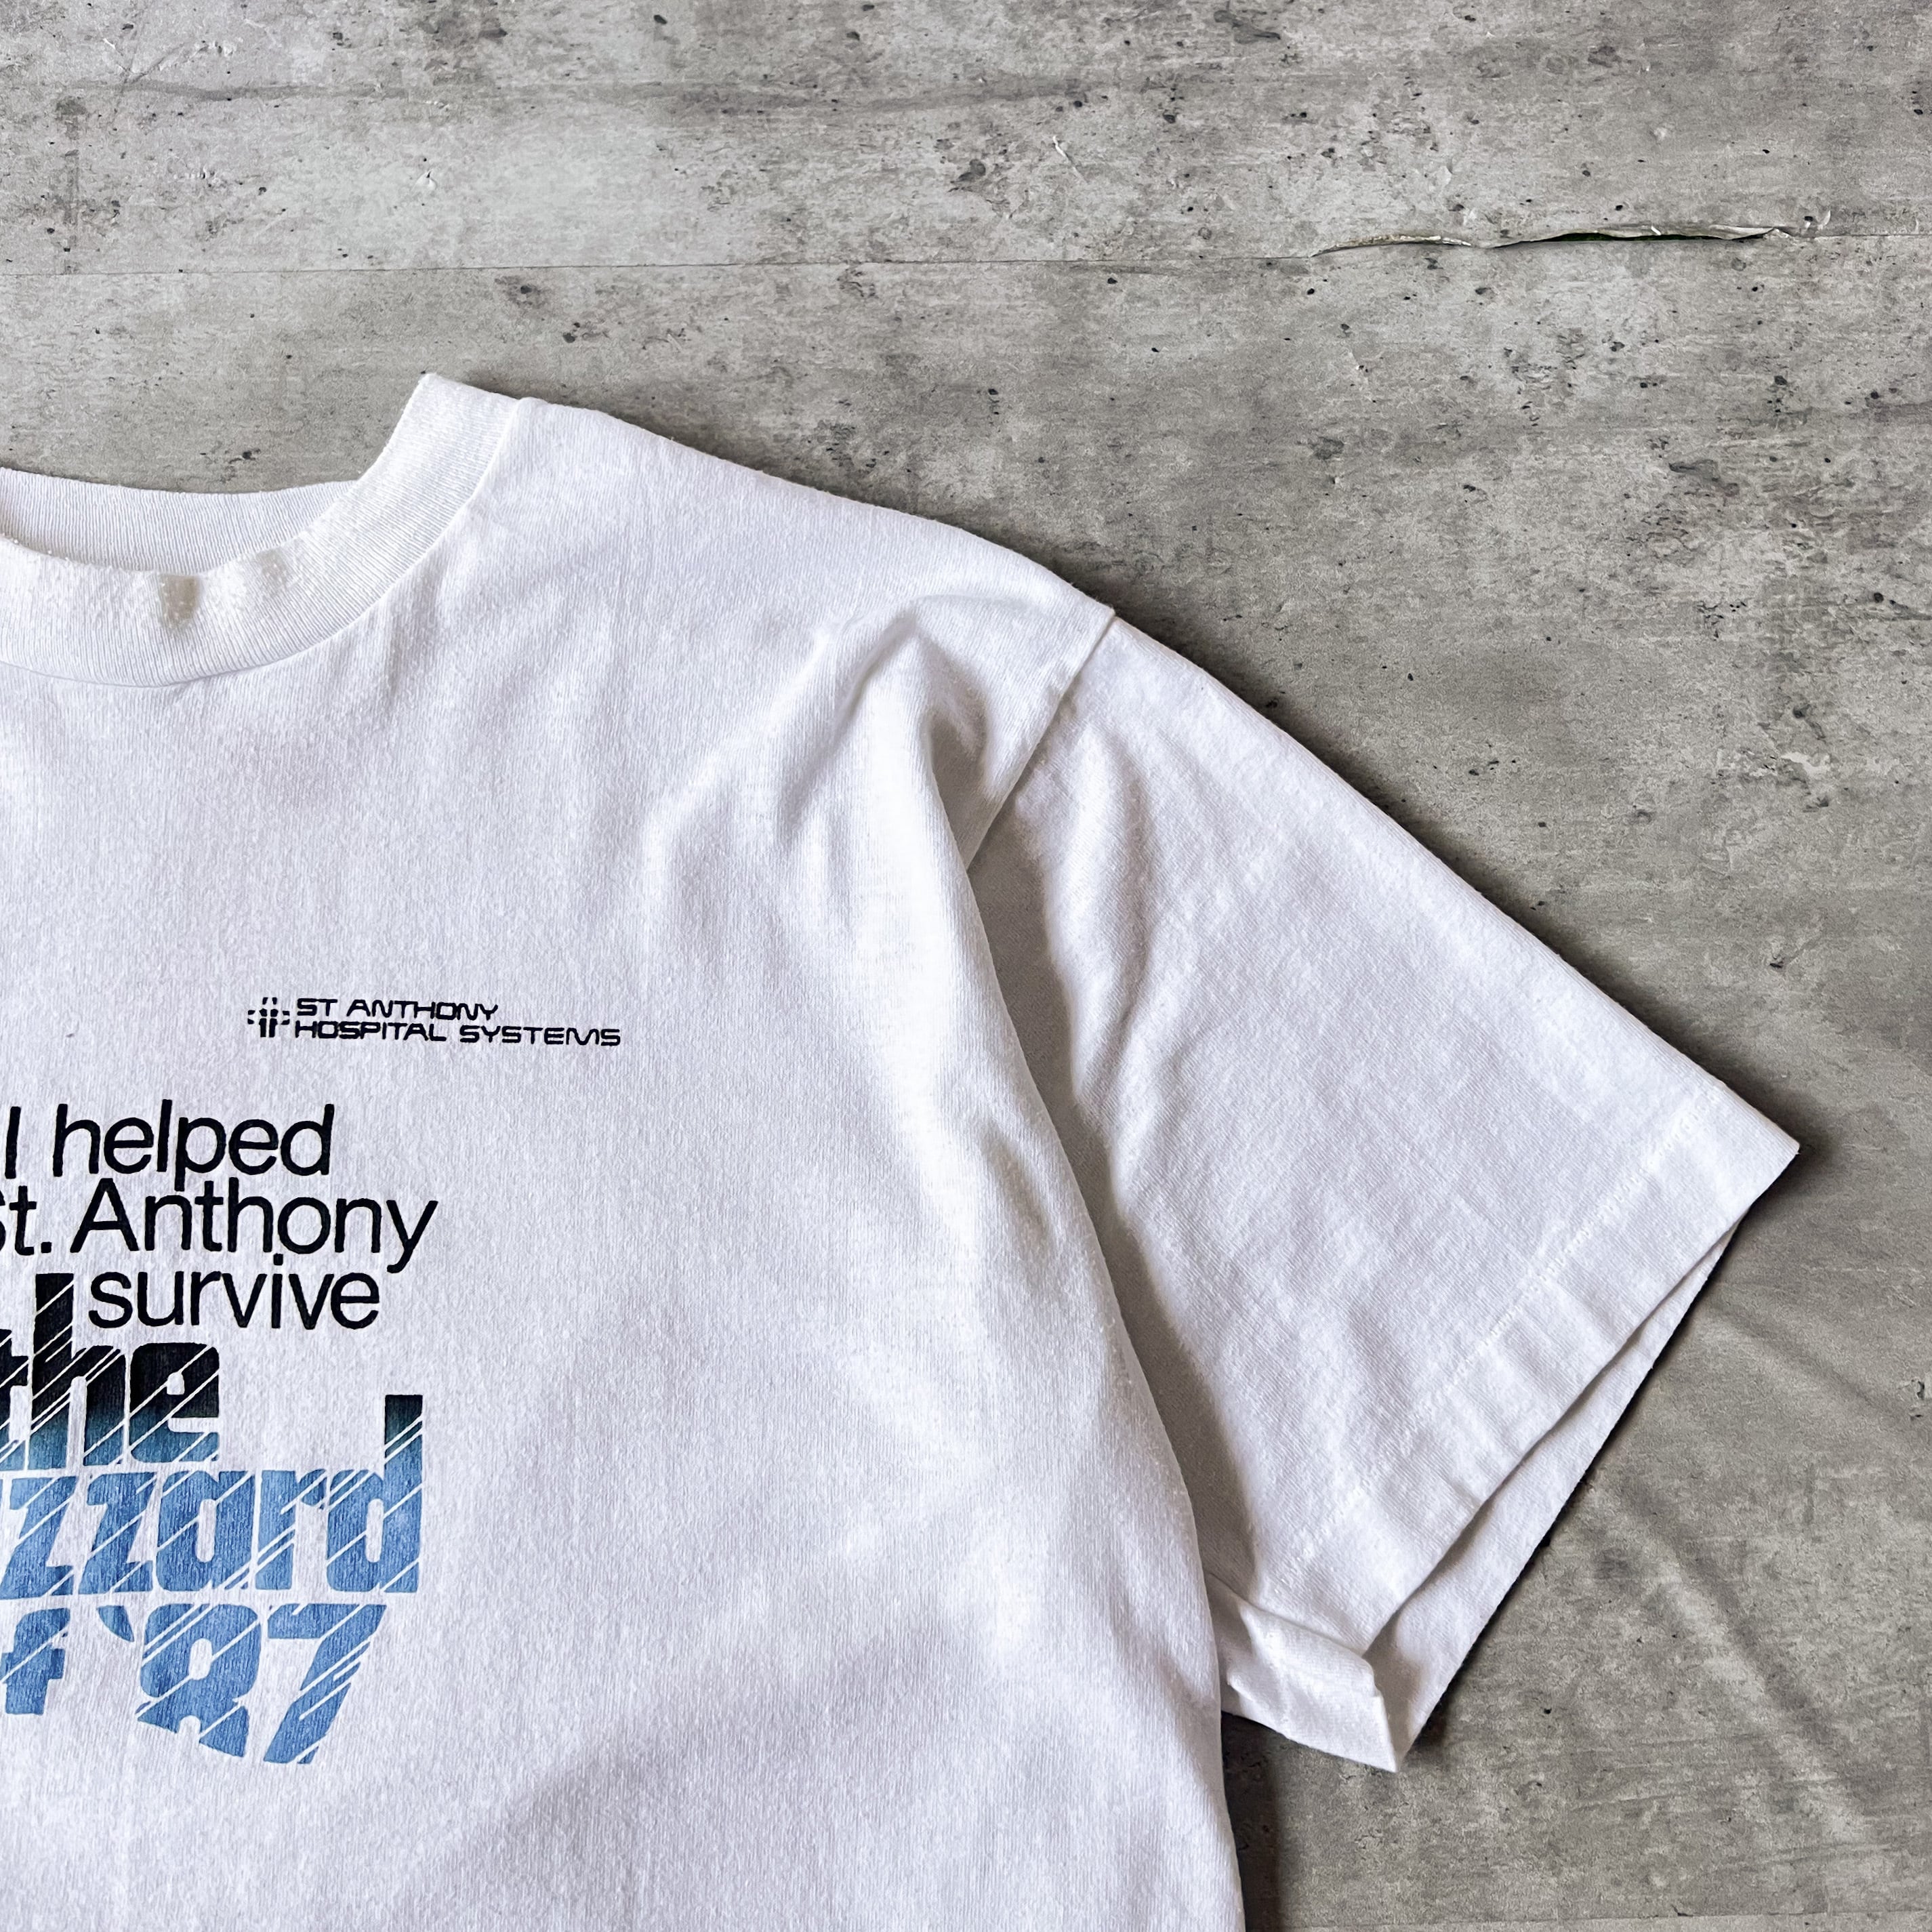 s “St. Anthony survise” tee 年代 ヴィンテージtシャツ 企業ロゴ